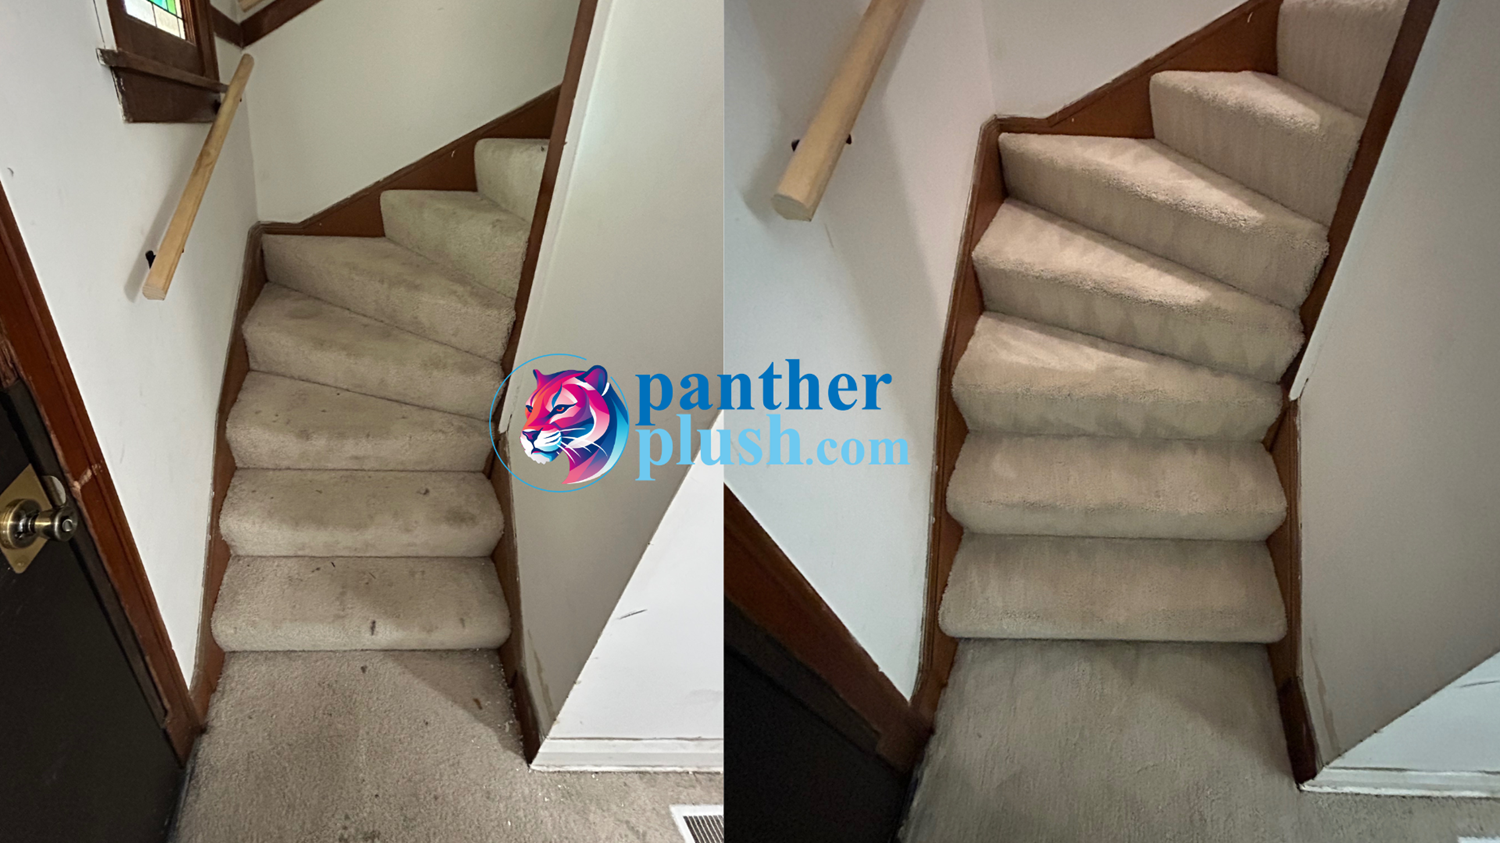 Photos of Our Business - Panther Plush - Photo (174874)